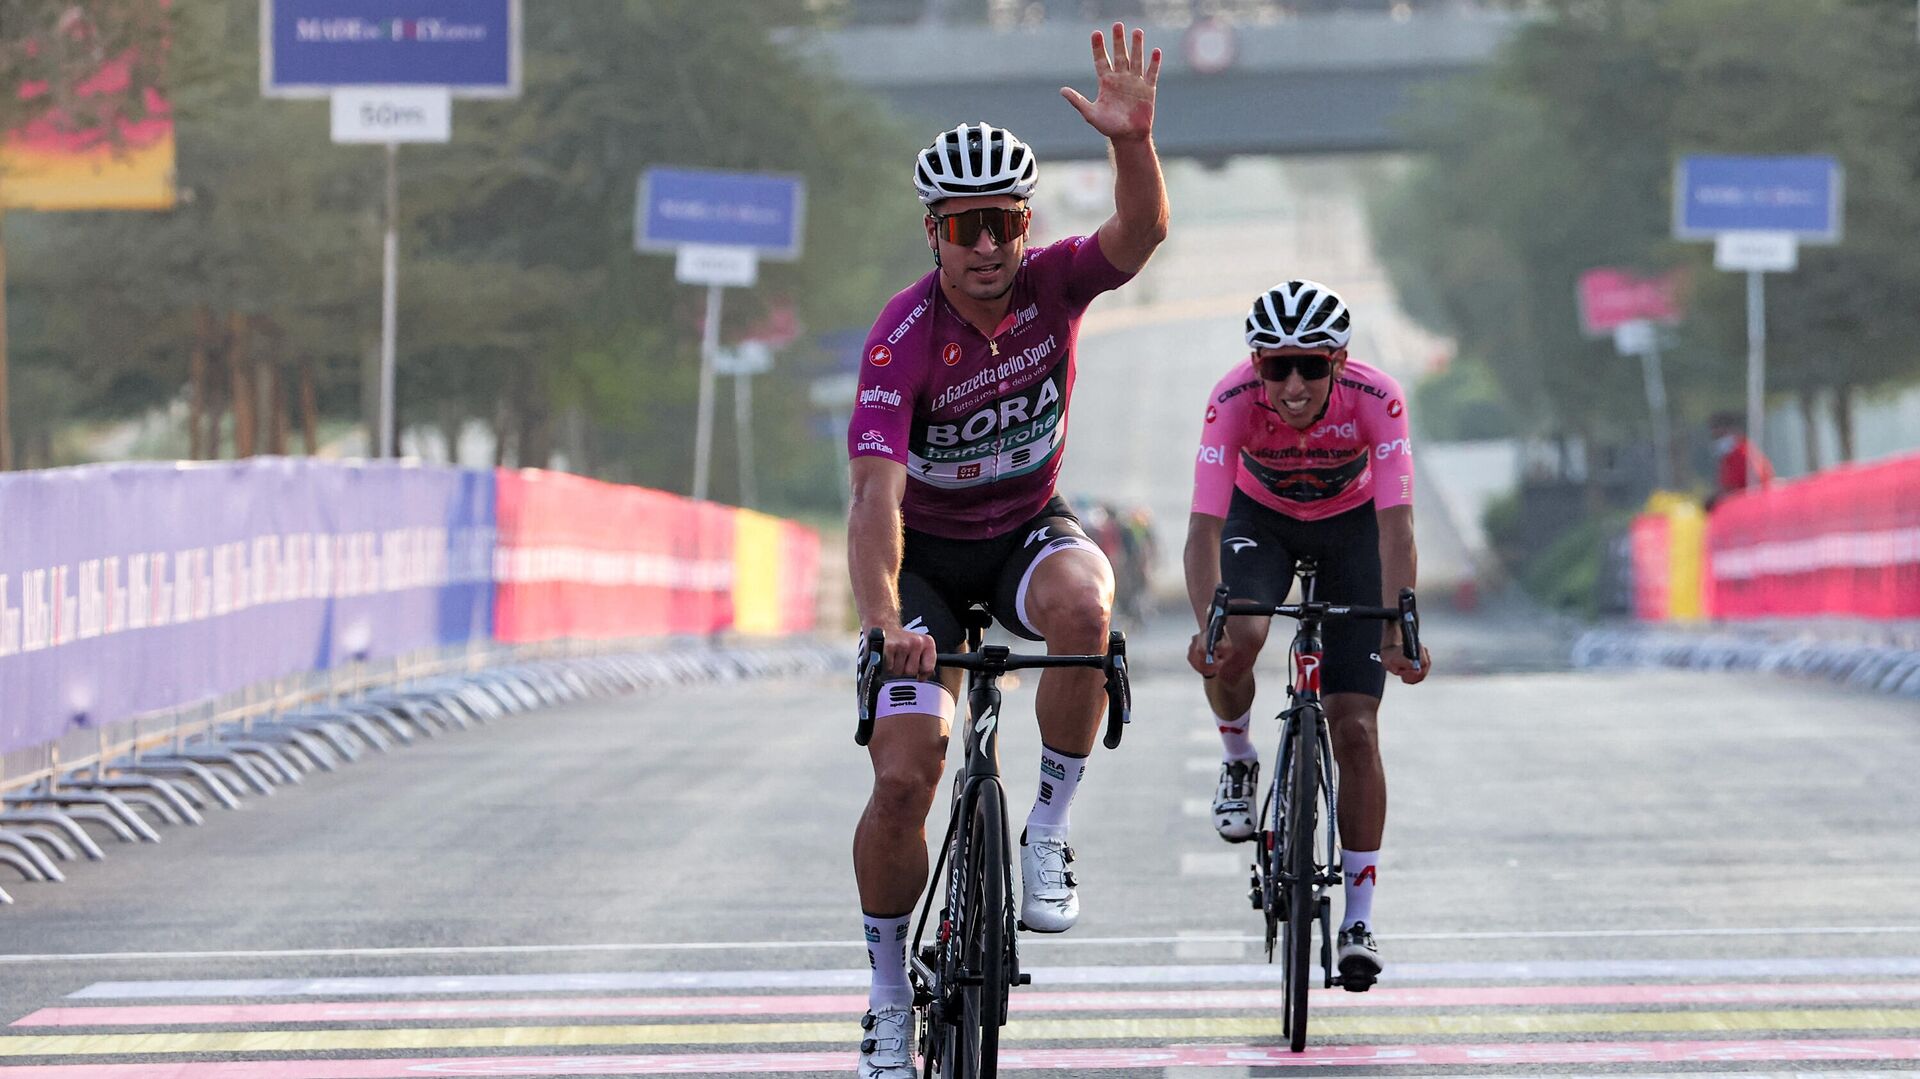 Peter Sagan of Bora–Hansgrohe (L) celebrates after crossing the finish line ahead of Egan Bernal of INEOS Grenadiers during the first-ever Giro d’Italia Criterium race at Expo 2020 in Dubai on November 6, 2021. (Photo by GIUSEPPE CACACE / AFP) - РИА Новости, 1920, 22.11.2021